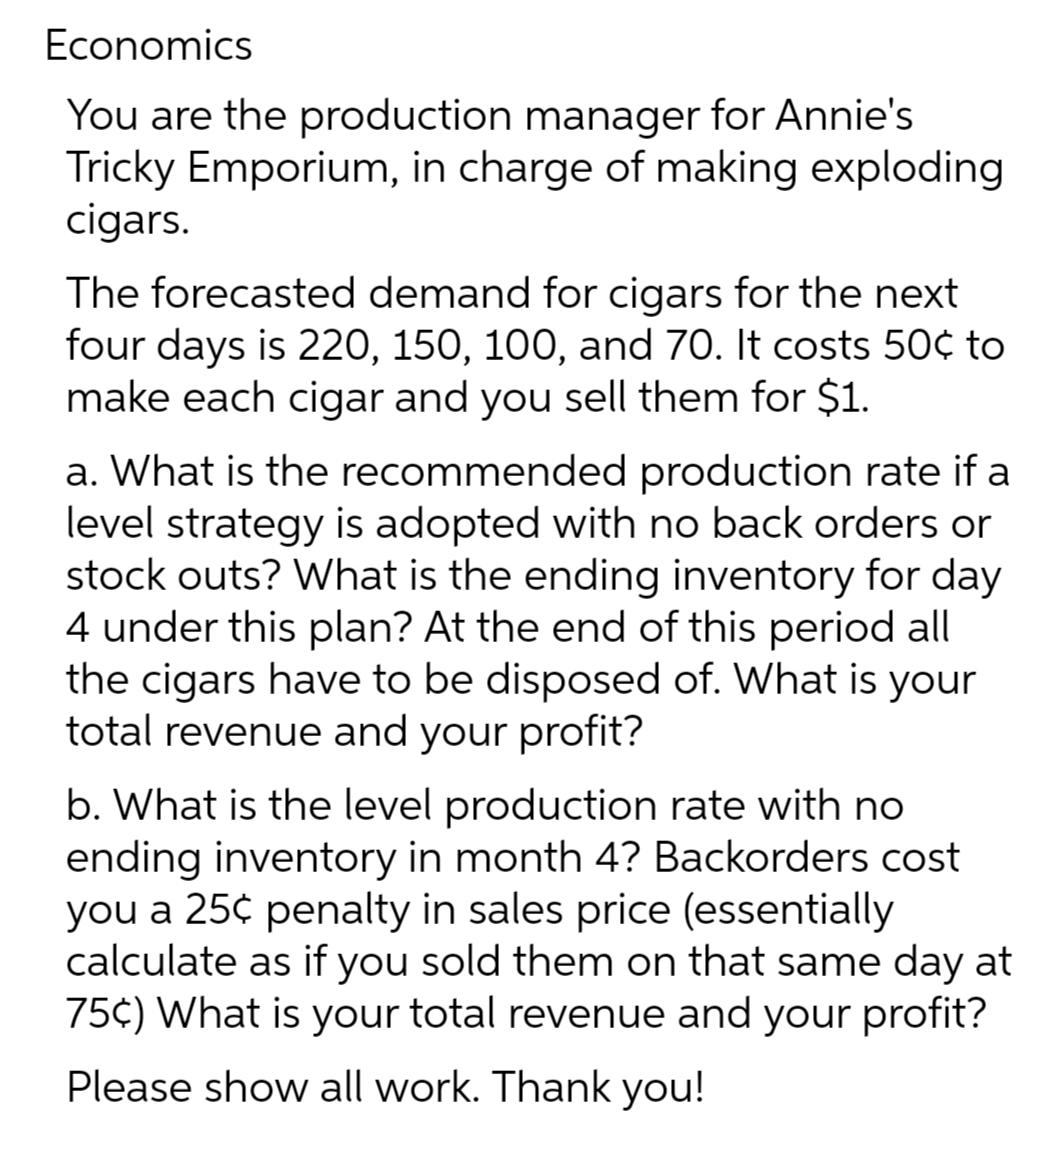 Economics
You are the production manager for Annie's
Tricky Emporium, in charge of making exploding
cigars.
The forecasted demand for cigars for the next
four days is 220, 150, 100, and 70. It costs 50¢ to
make each cigar and you sell them for $1.
a. What is the recommended production rate if a
level strategy is adopted with no back orders or
stock outs? What is the ending inventory for day
4 under this plan? At the end of this period all
the cigars have to be disposed of. What is your
total revenue and your profit?
b. What is the level production rate with no
ending inventory in month 4? Backorders cost
you a 25¢ penalty in sales price (essentially
calculate as if you sold them on that same day at
75¢) What is your total revenue and your profit?
Please show all work. Thank you!
